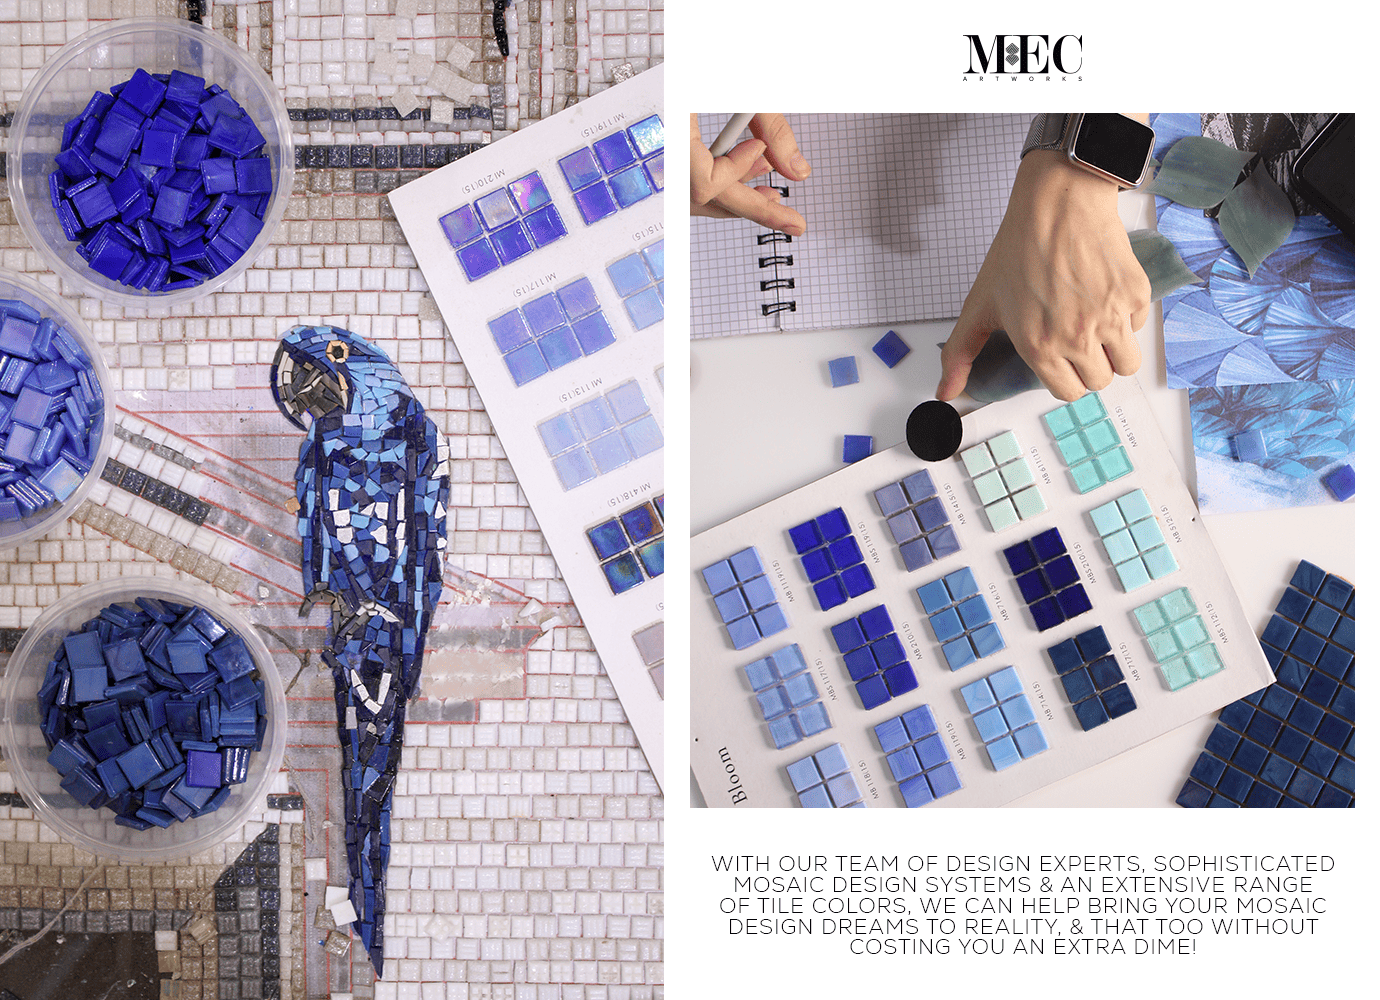 A mosaic artist assembling a blue-toned mosaic art piece of a bird, with various shades of blue tiles and design sketches visible.